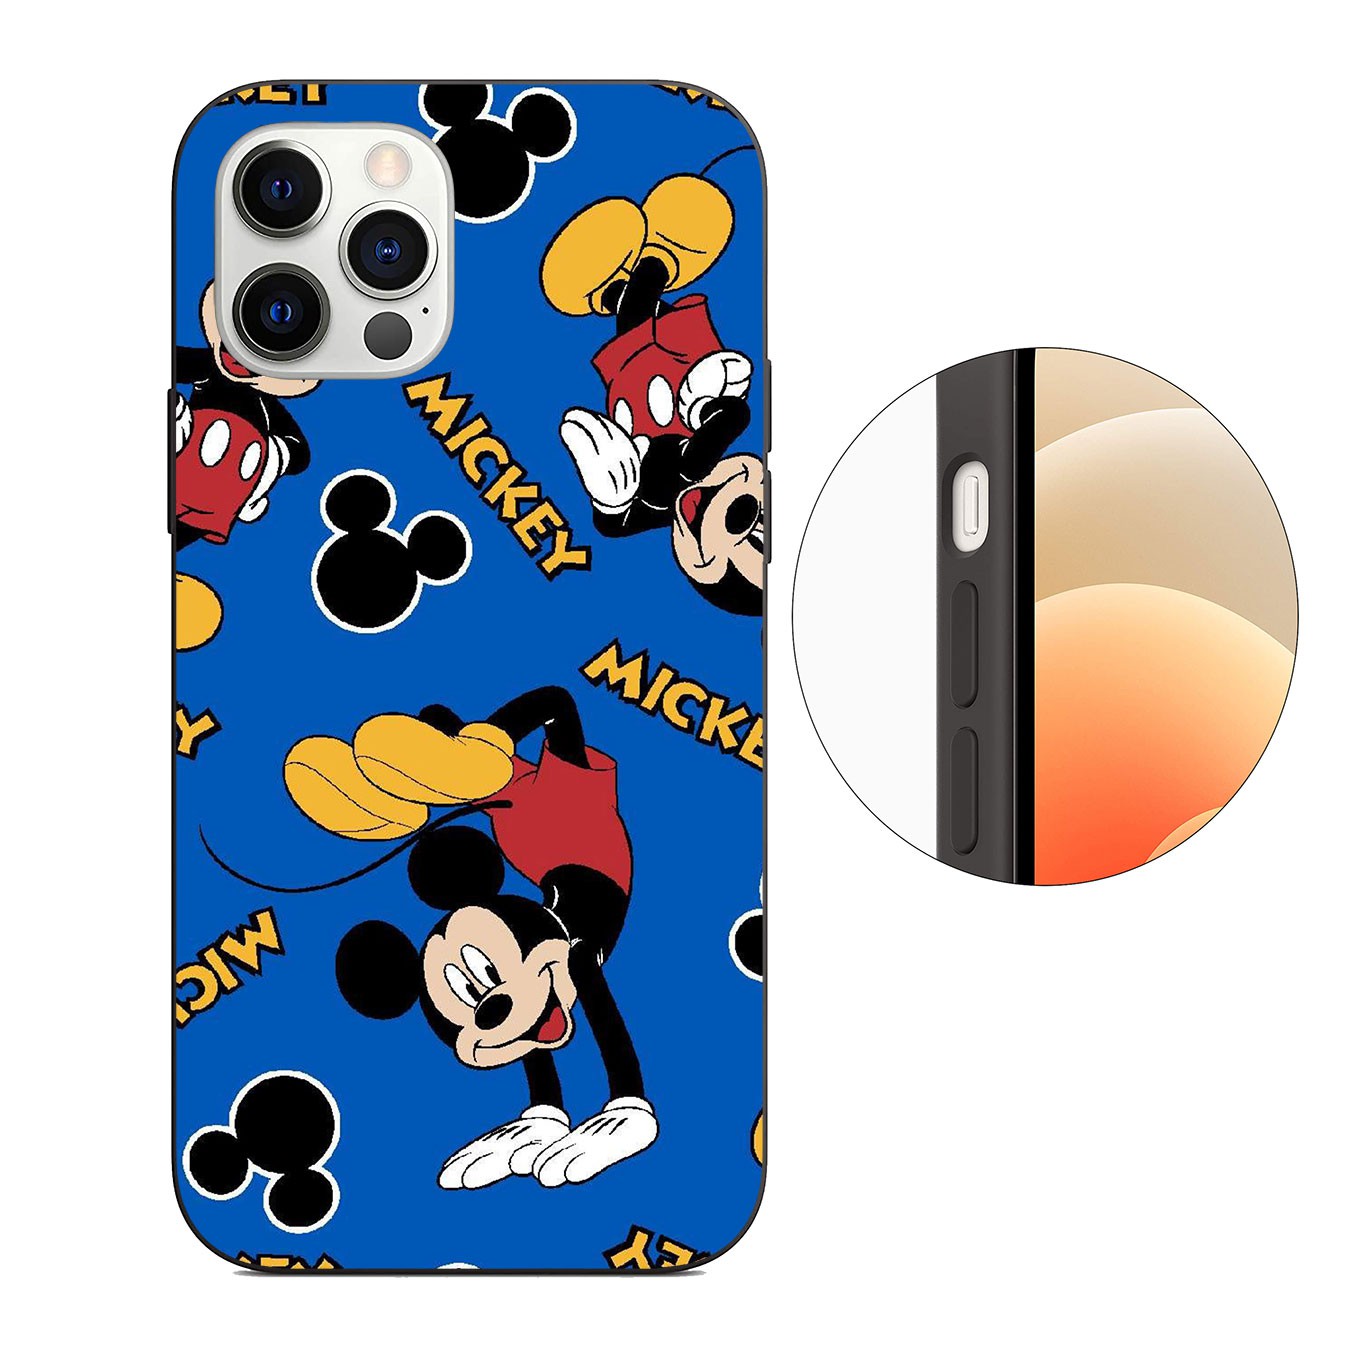 Samsung Galaxy S21 Ultra S8 Plus F62 M62 A2 A32 A52 A72 S21+ S8+ S21Plus Casing Soft Silicone Phone Case Mickey Mouse Cartoon Cover